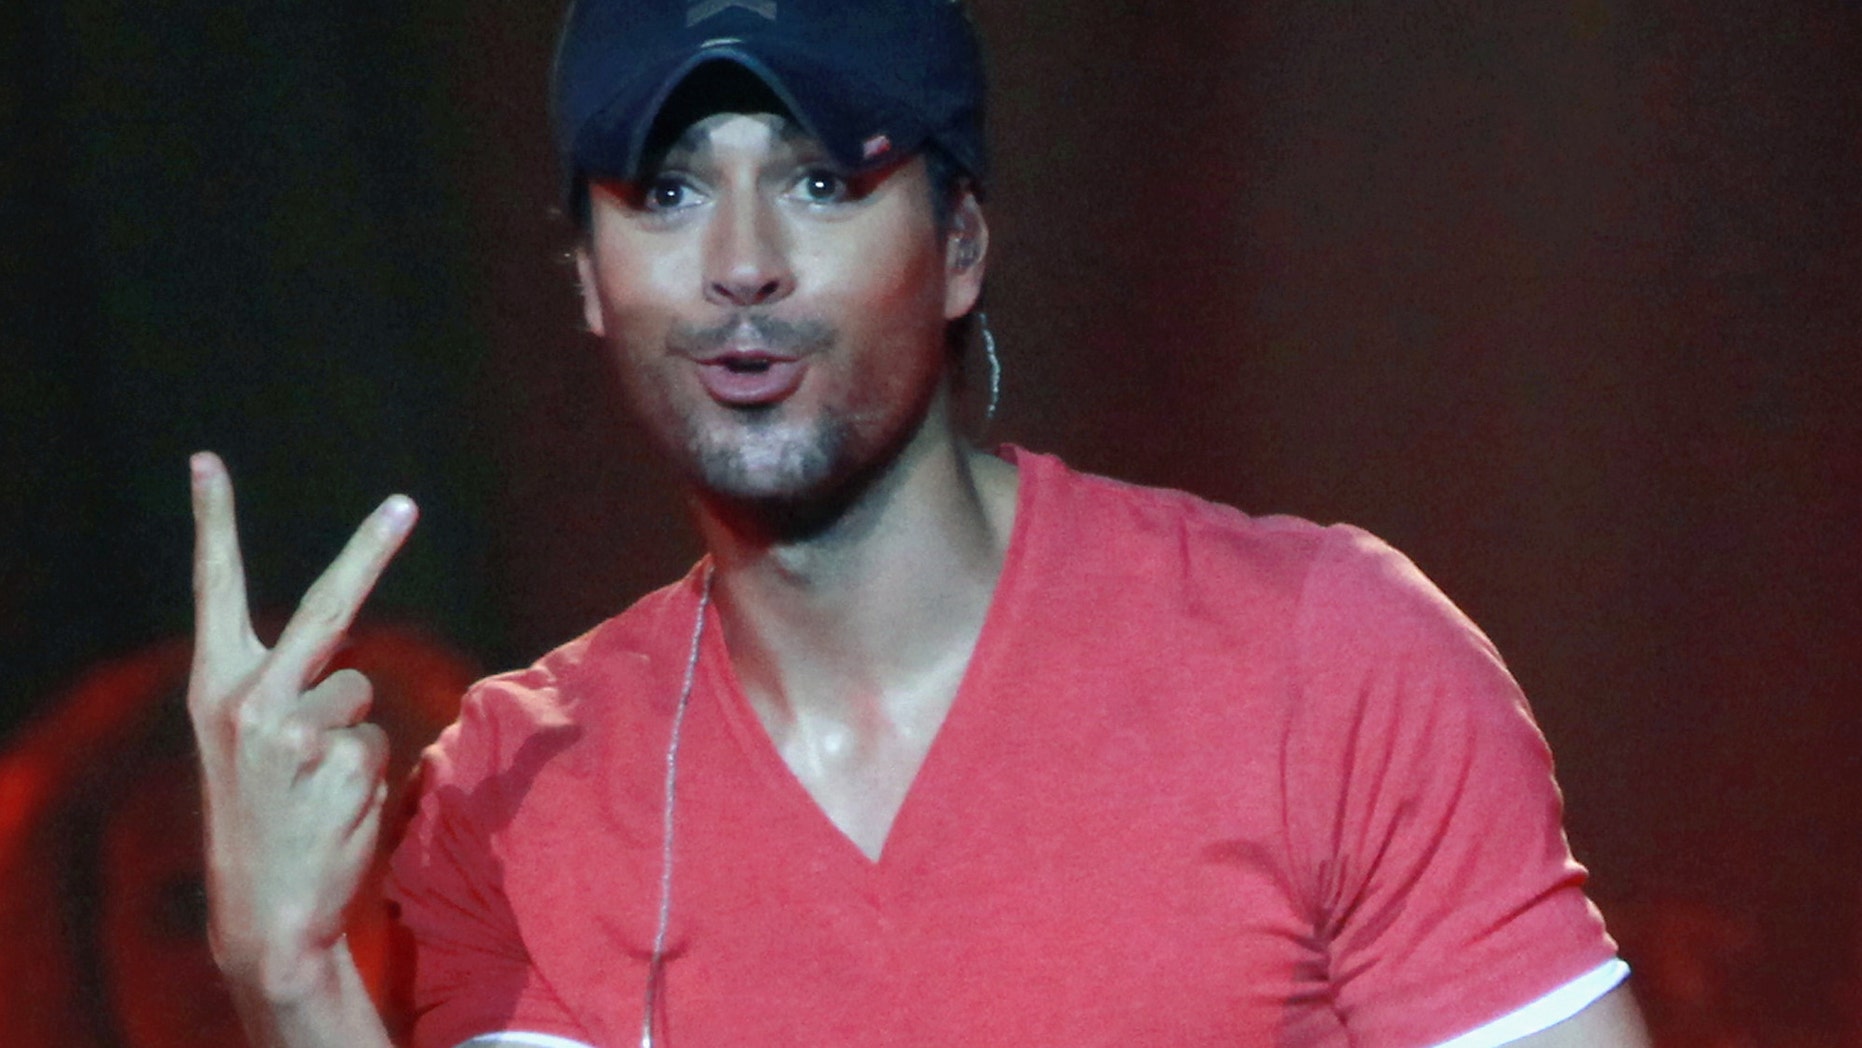 Philippines: Enrique Iglesias Urges Fans To Aid His Mother's Homeland